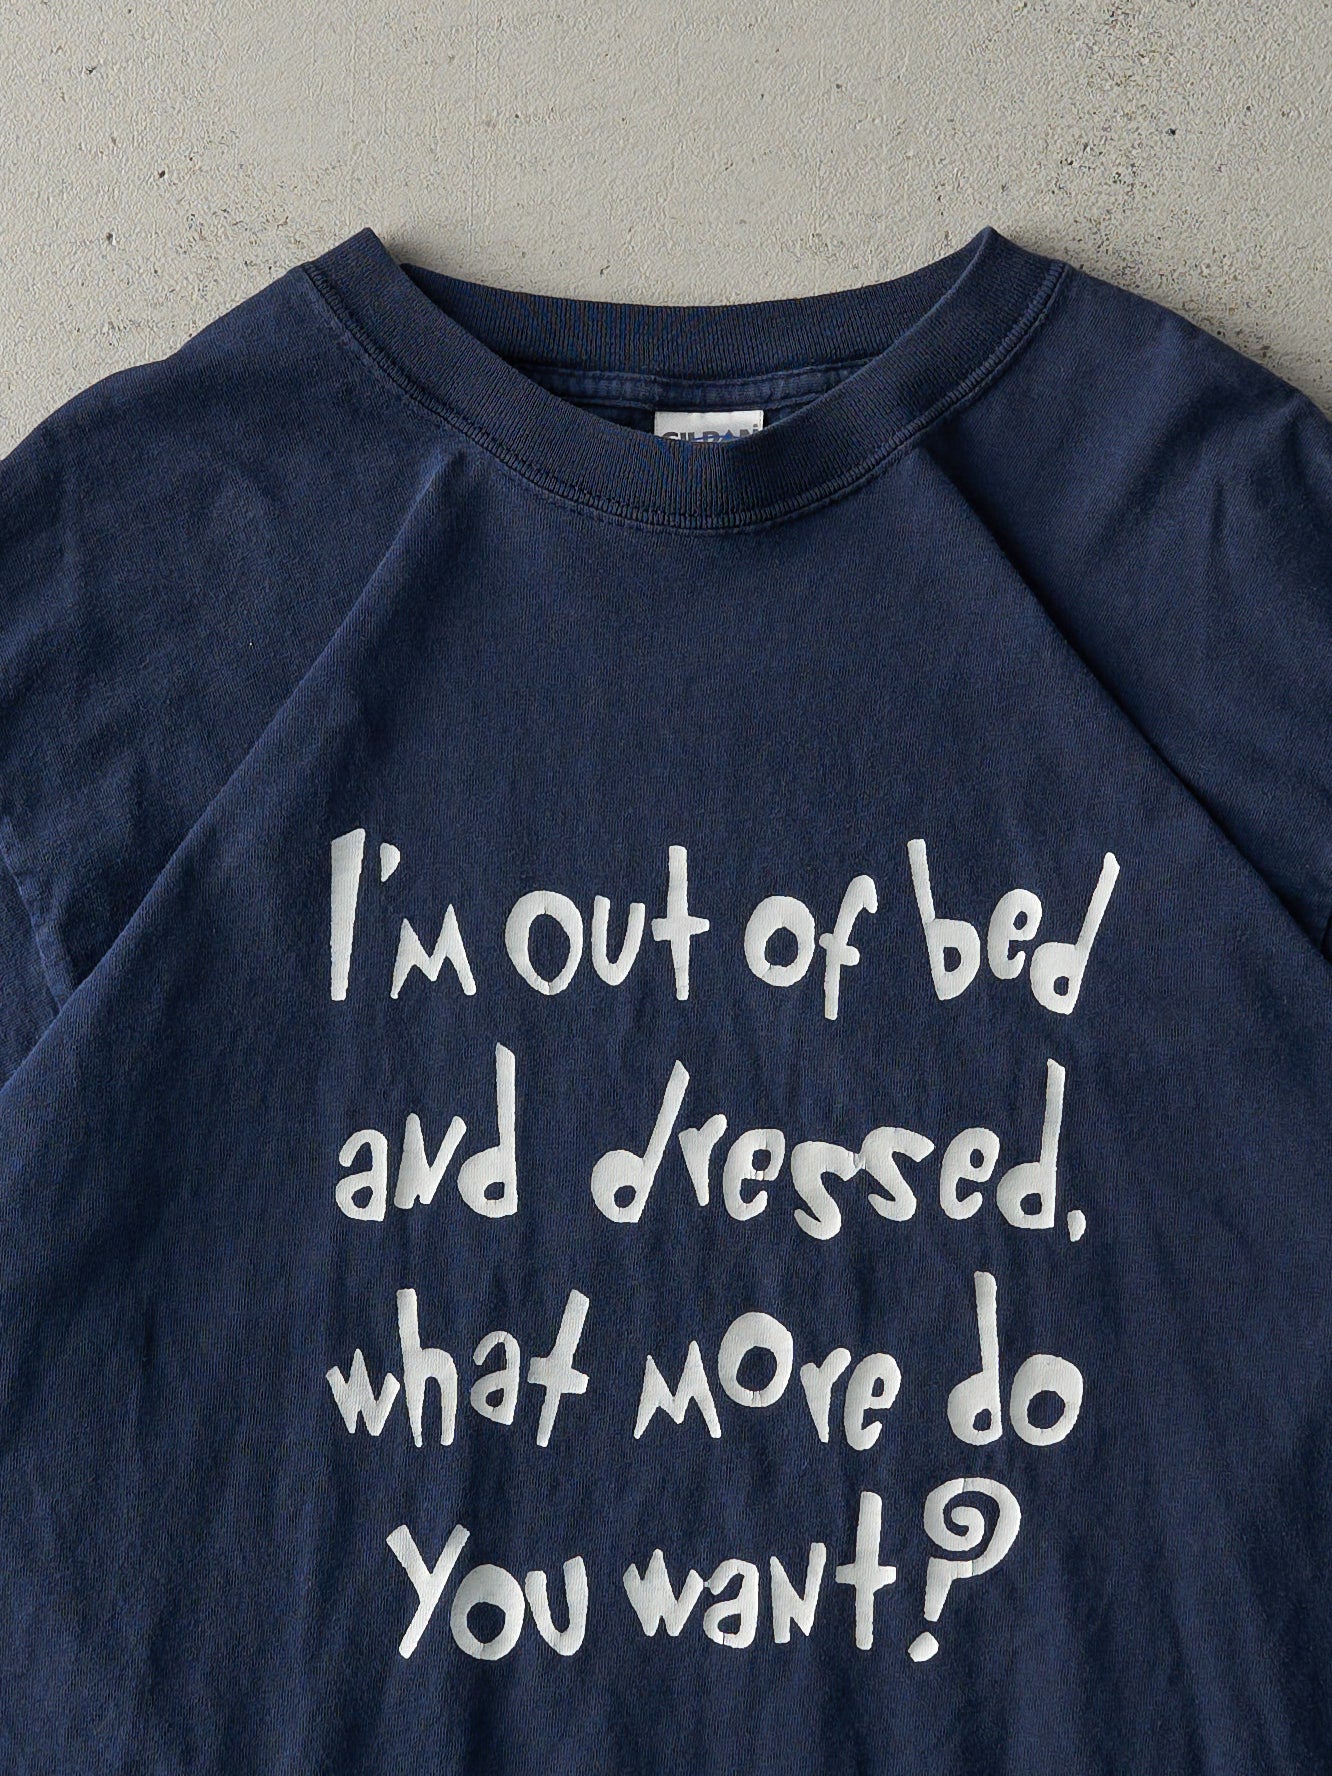 Vintage Y2K Navy Blue "I'm Out of Bed and Dressed" Tee (M)